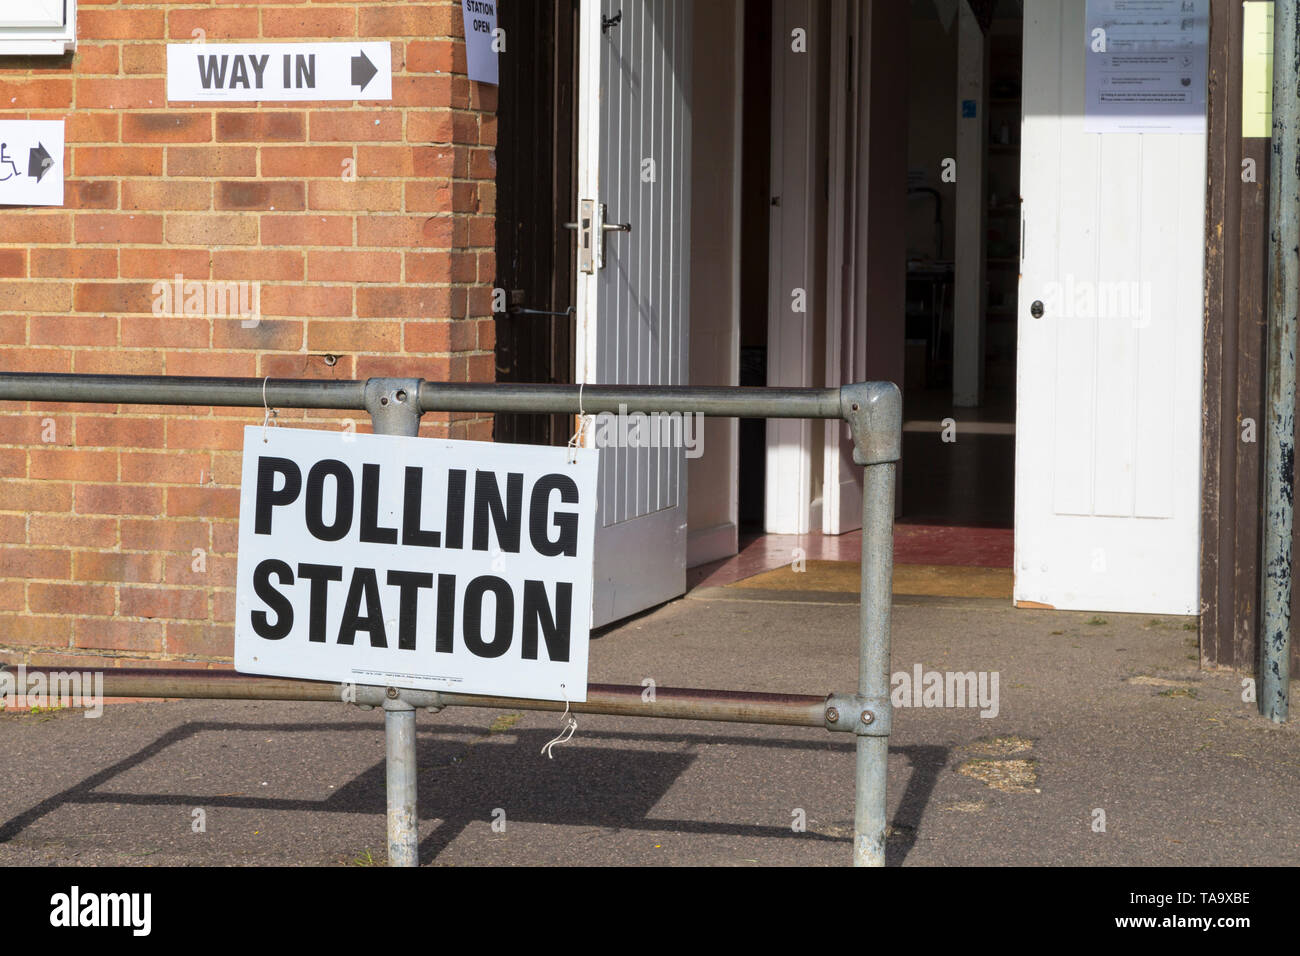 Ashford, Kent, UK. 23rd May, 2019. Seventy-three members, known as MEPs, will be elected in nine constituencies in England, and one in Scotland, Wales and Northern Ireland. 10 MEPs willl be voted for in the South East region. Villagers in Hamstreet near Ashford in Kent vote in the local community village hall, they have until 10pm this evening to cast a vote. ©Paul Lawrenson 2019, Photo Credit: Paul Lawrenson/Alamy Live News Stock Photo